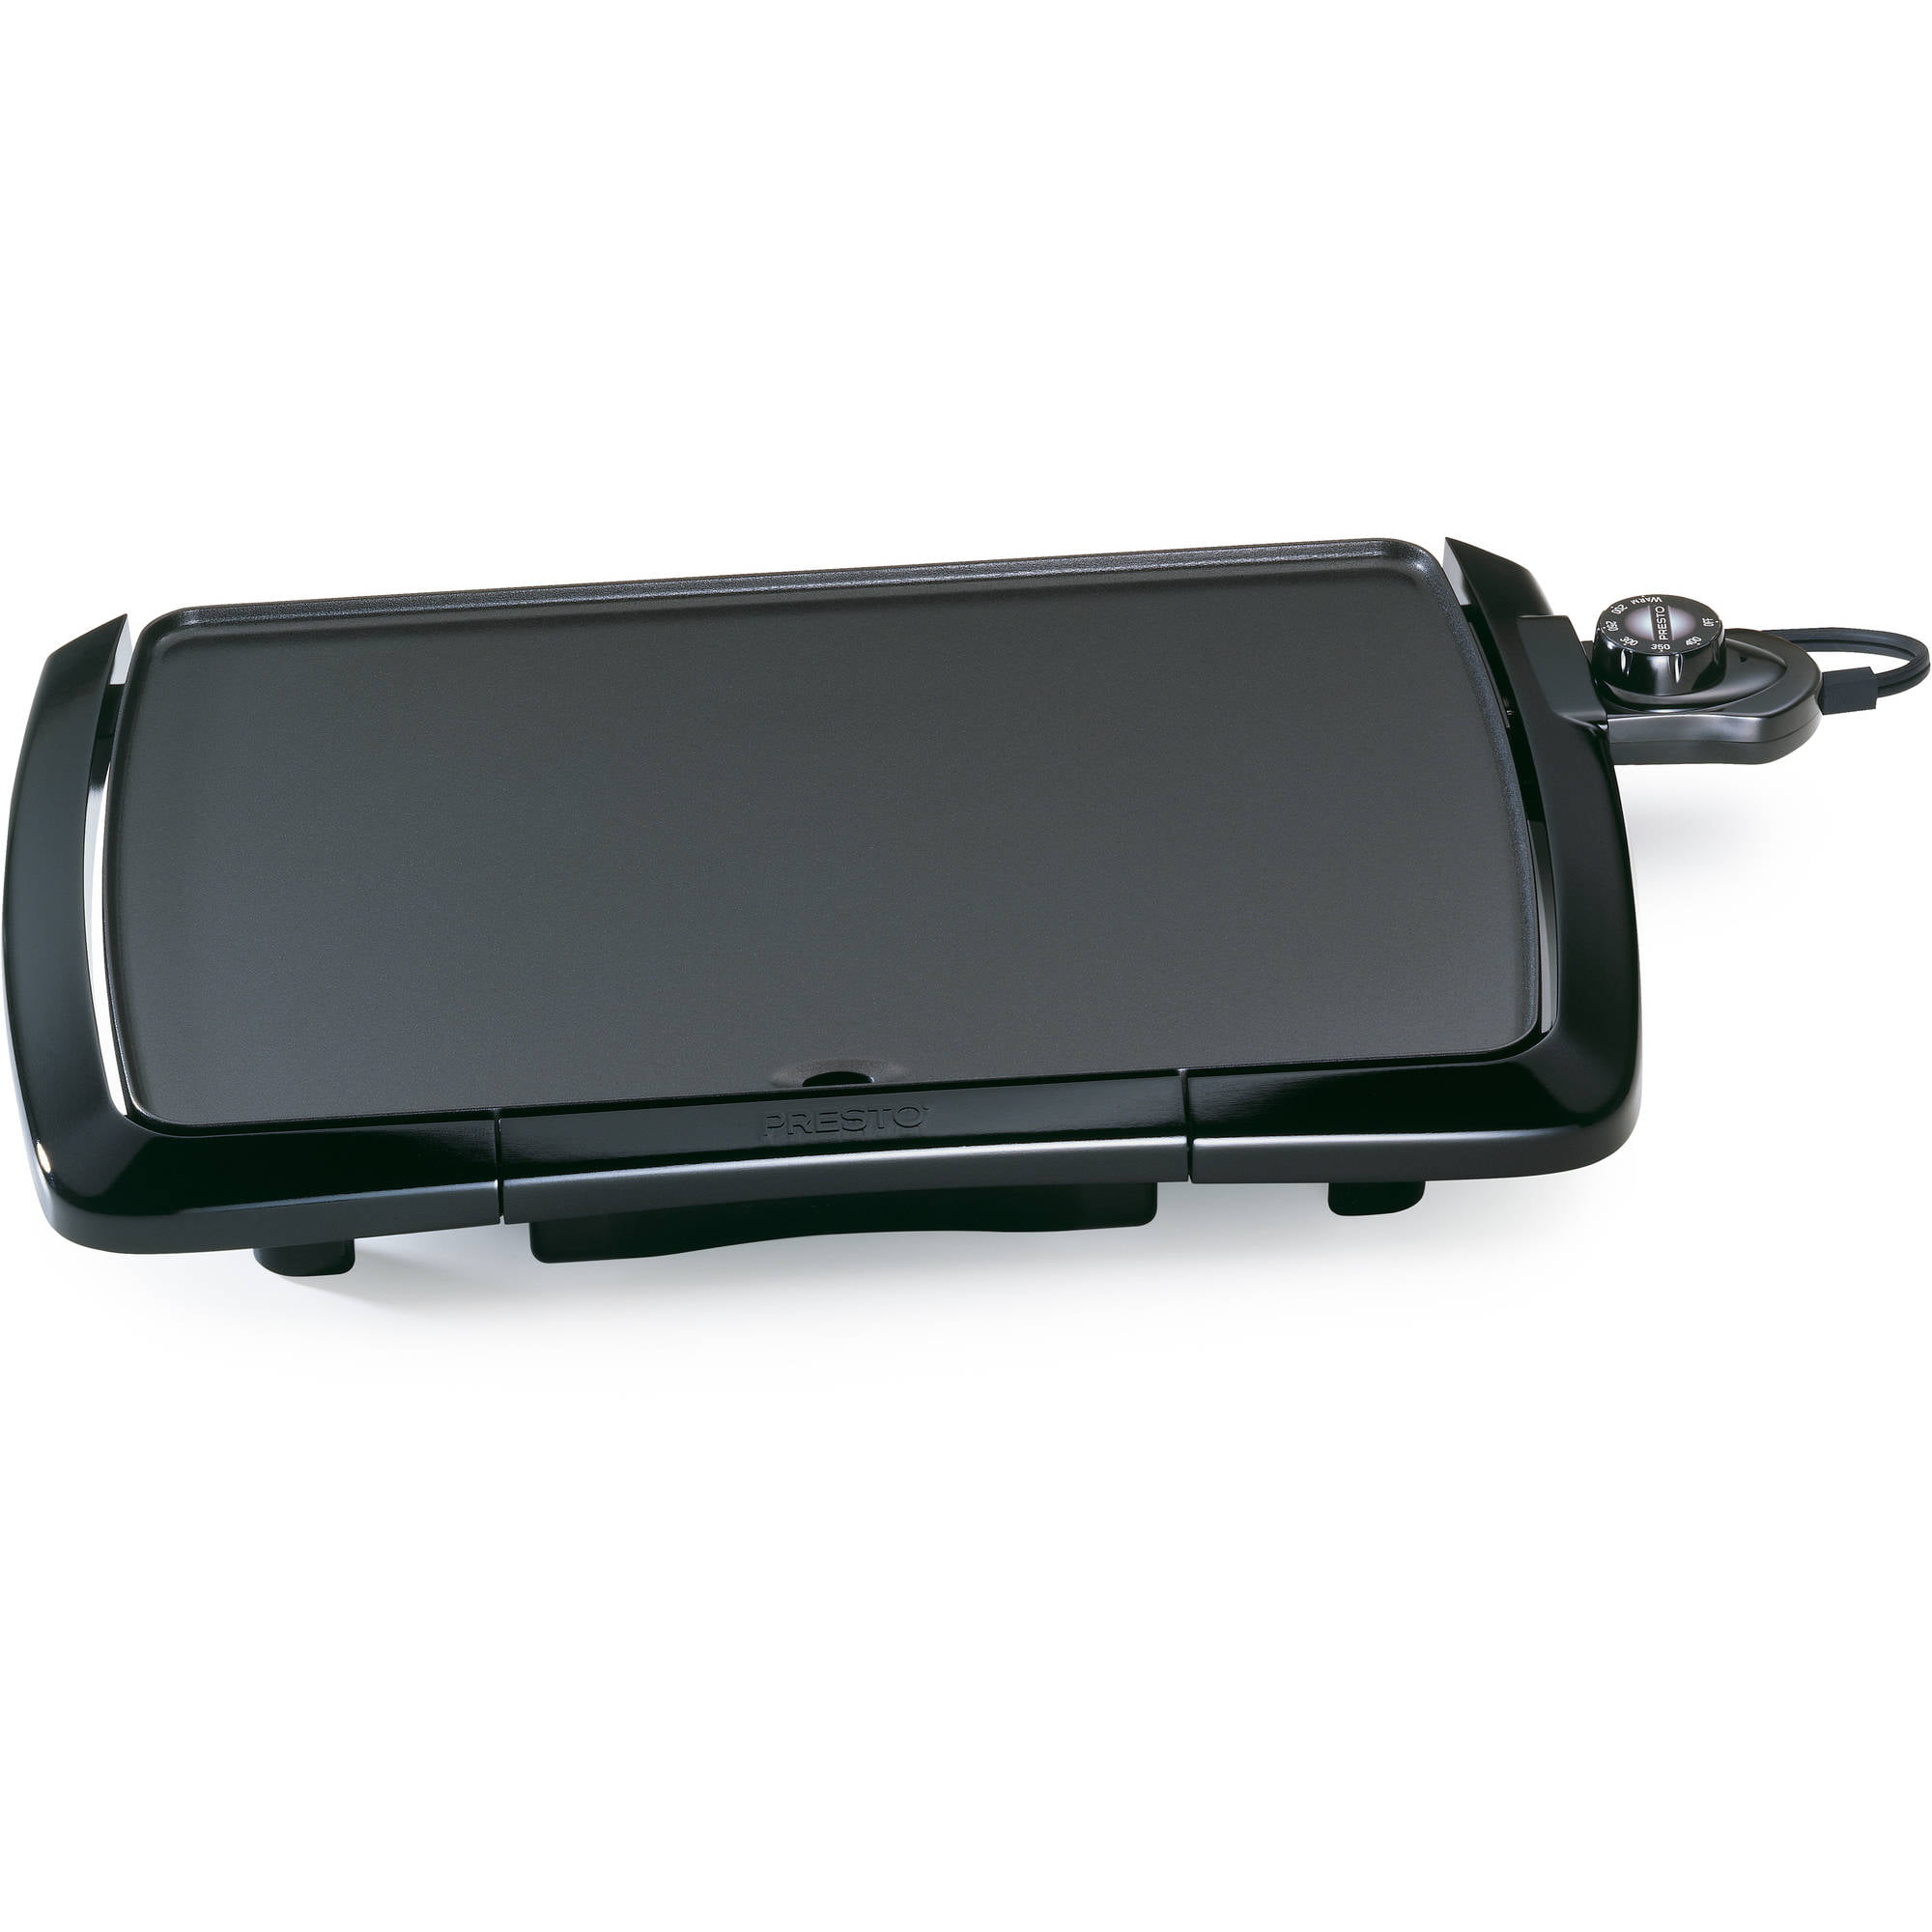 NEW Presto 07047 Cool Touch Electric Griddle 10.5x16